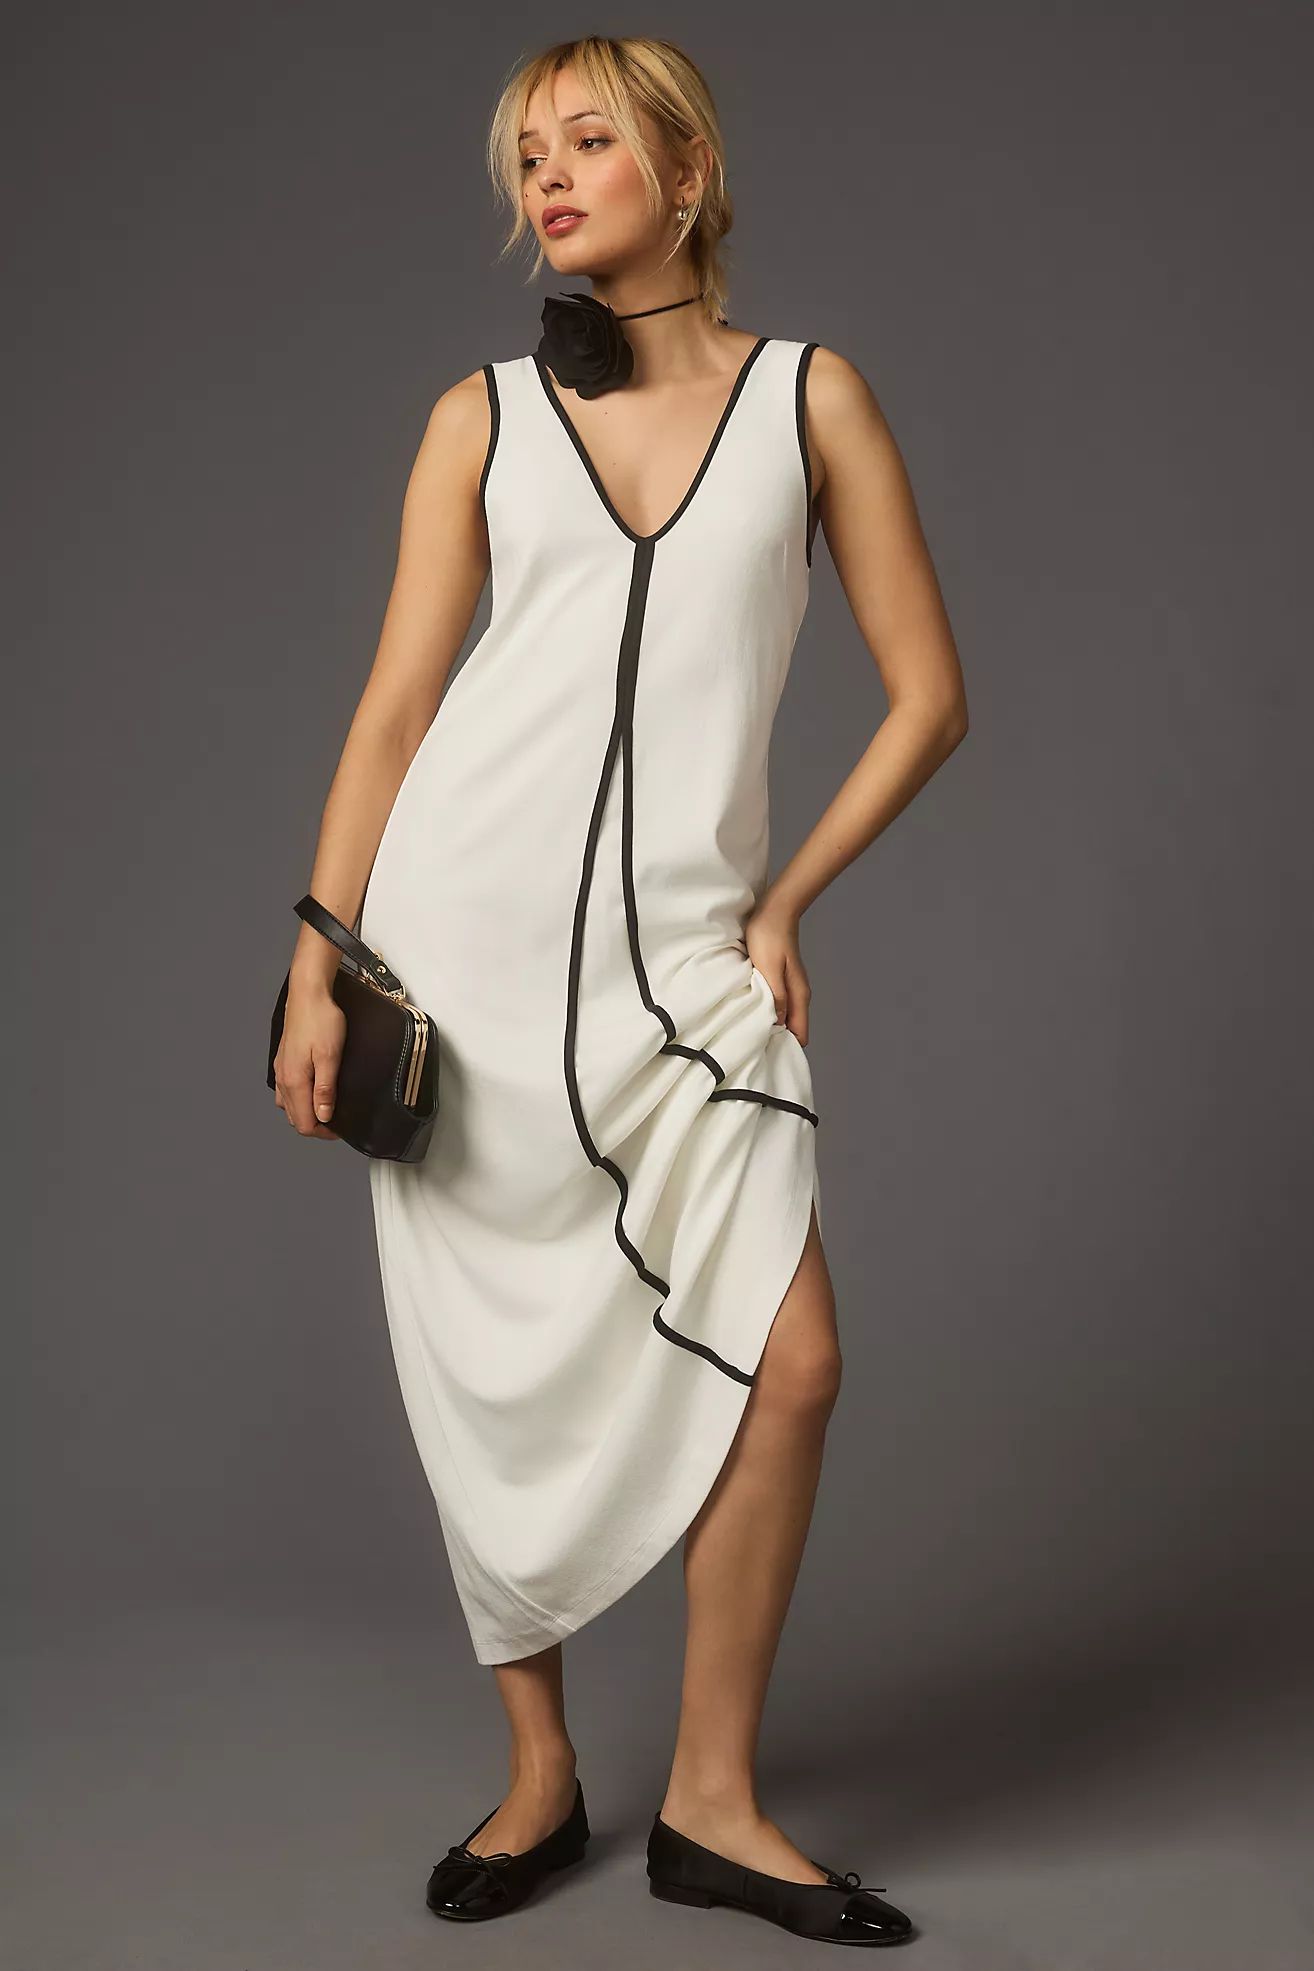 By Anthropologie Piped Maxi Dress | Anthropologie (UK)